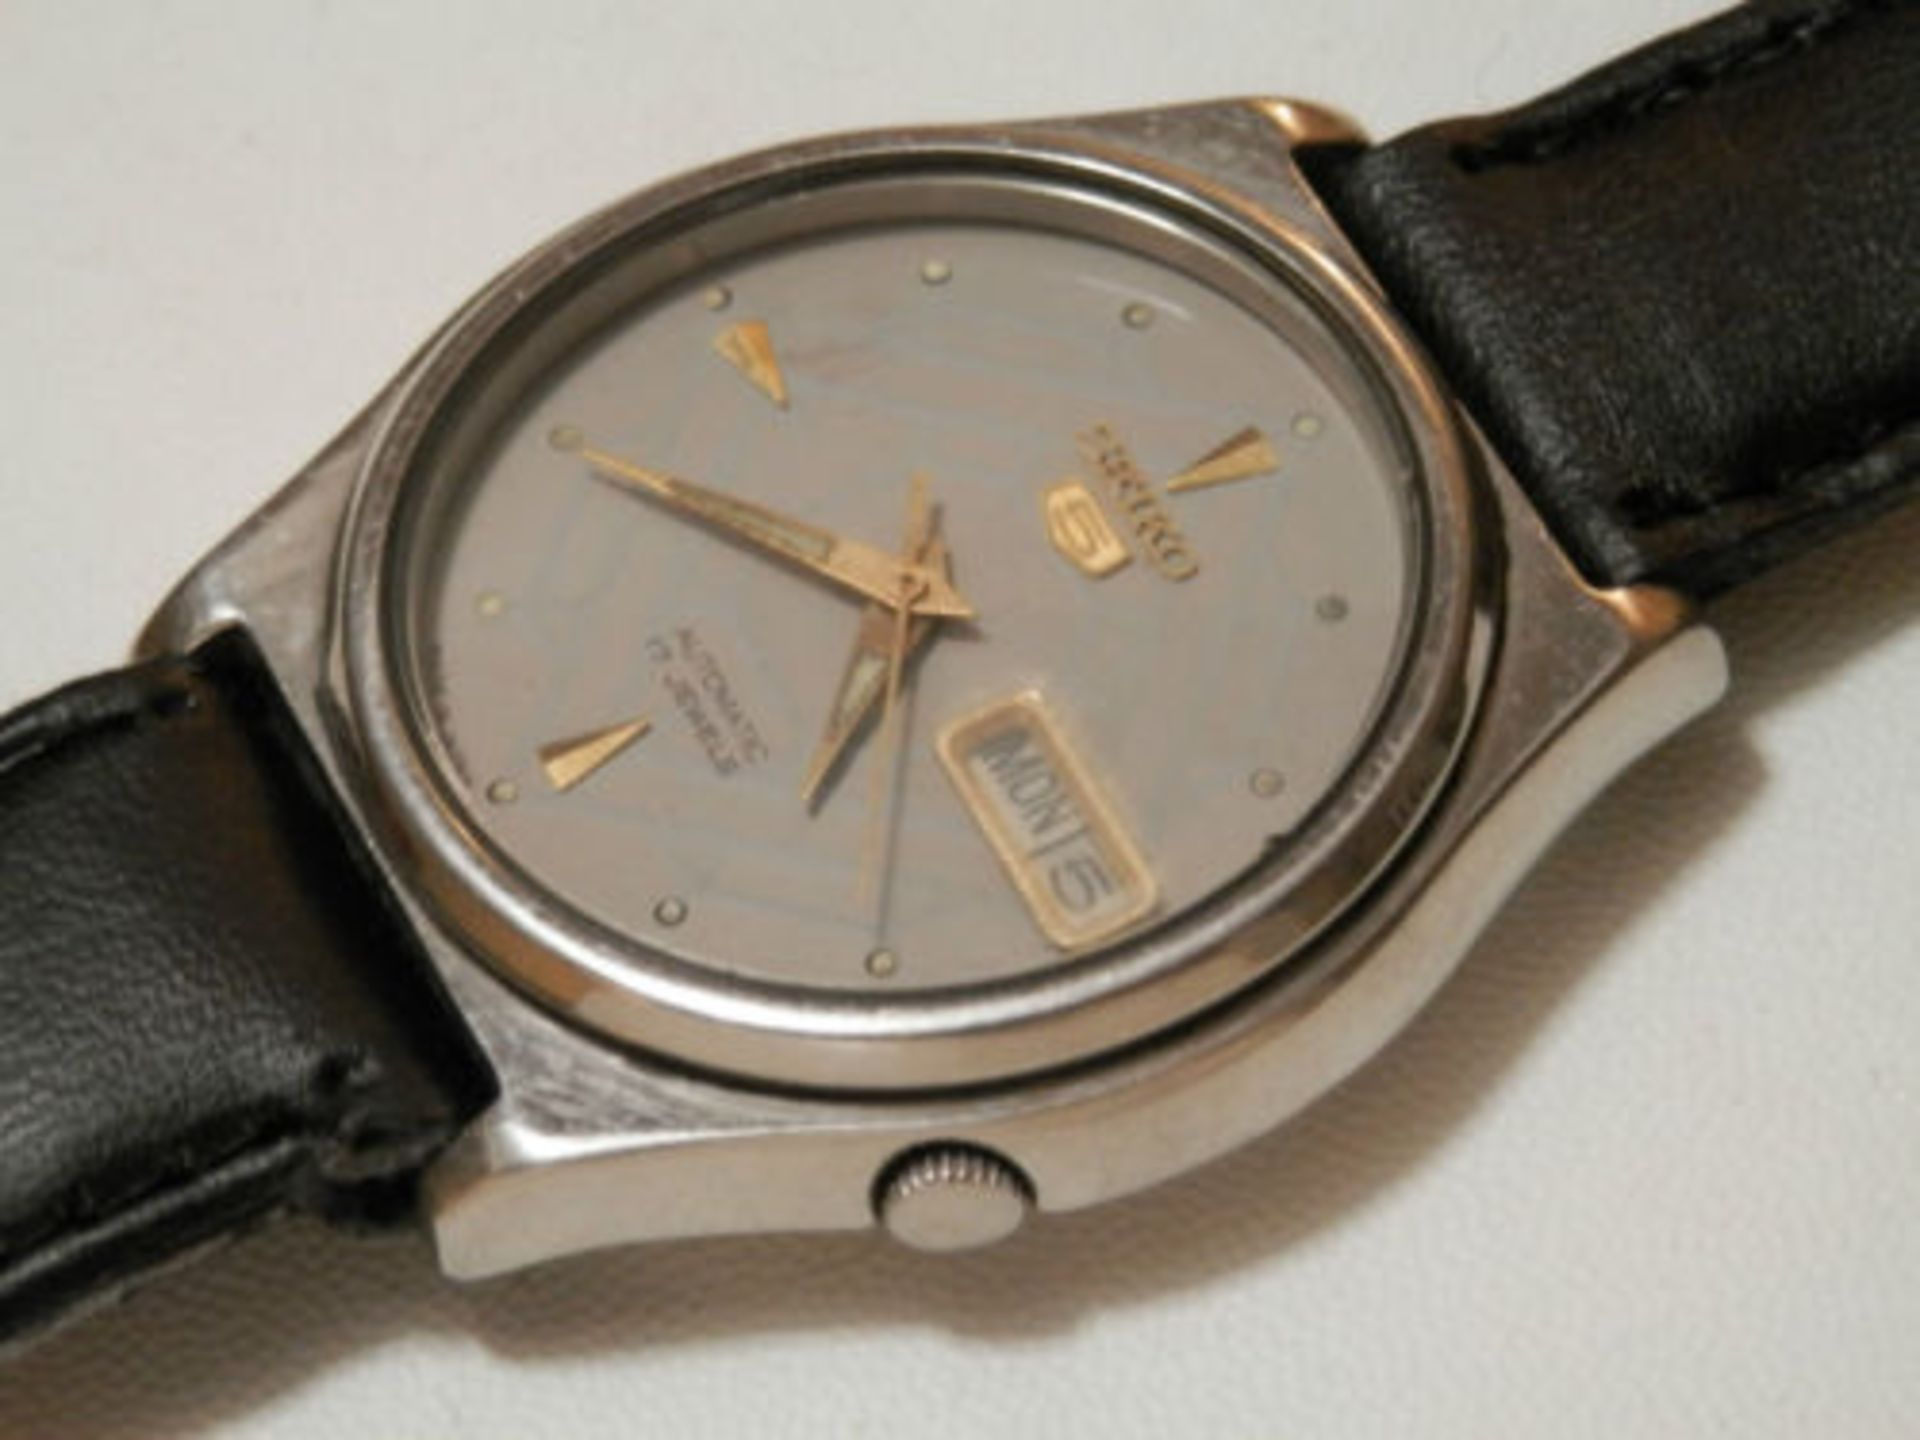 1984 WORKING SEIKO 7009 AUTOMATIC 17 JEWEL DAY/DATE WATCH, STAINLESS CASE. - Image 6 of 13